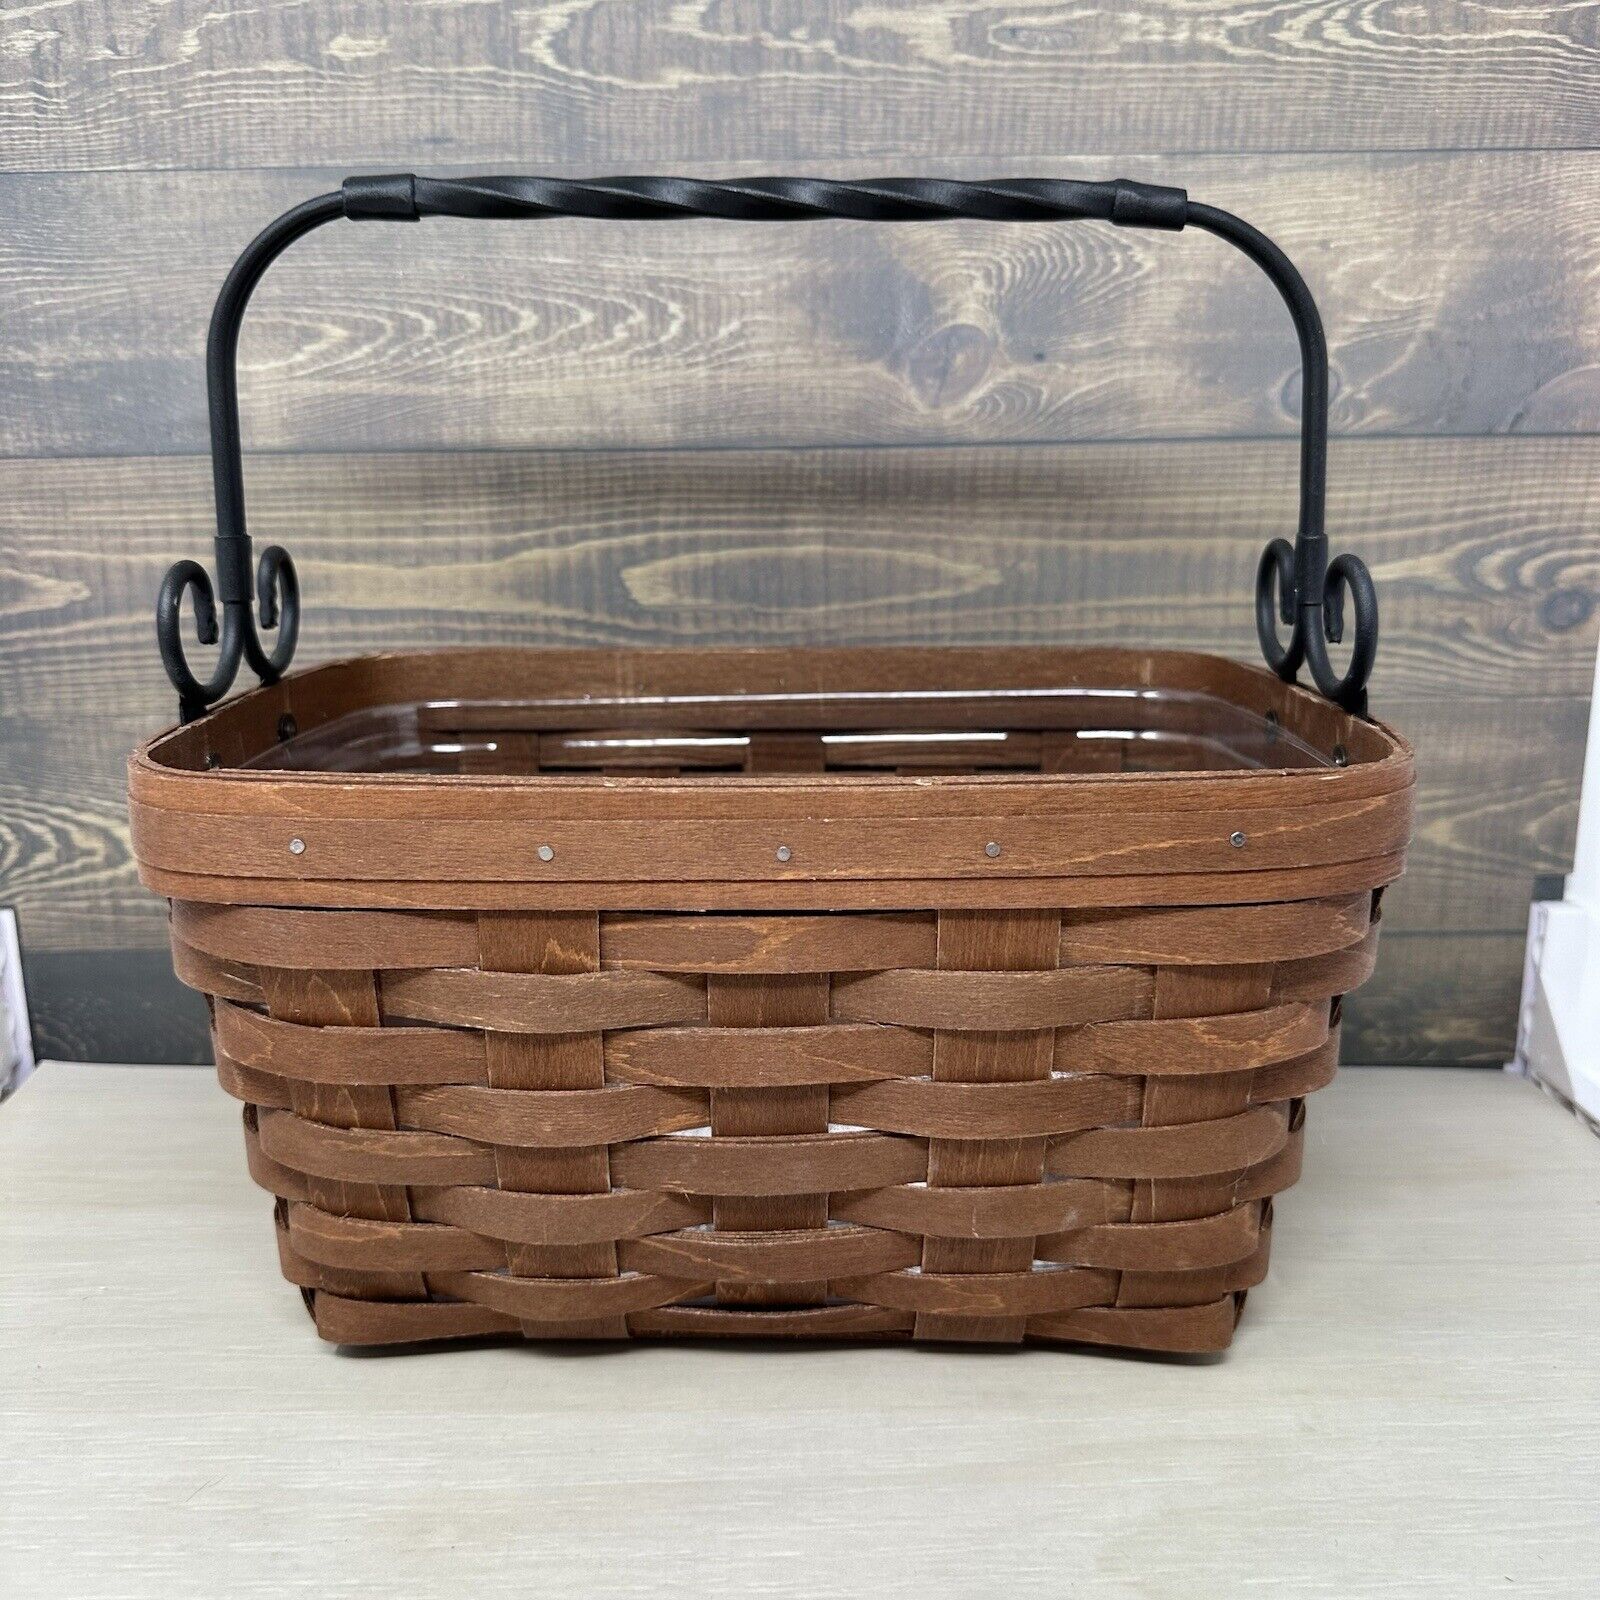 Longaberger Rich Brown Artisan Bread Basket 2012 with Wrought Iron Handle